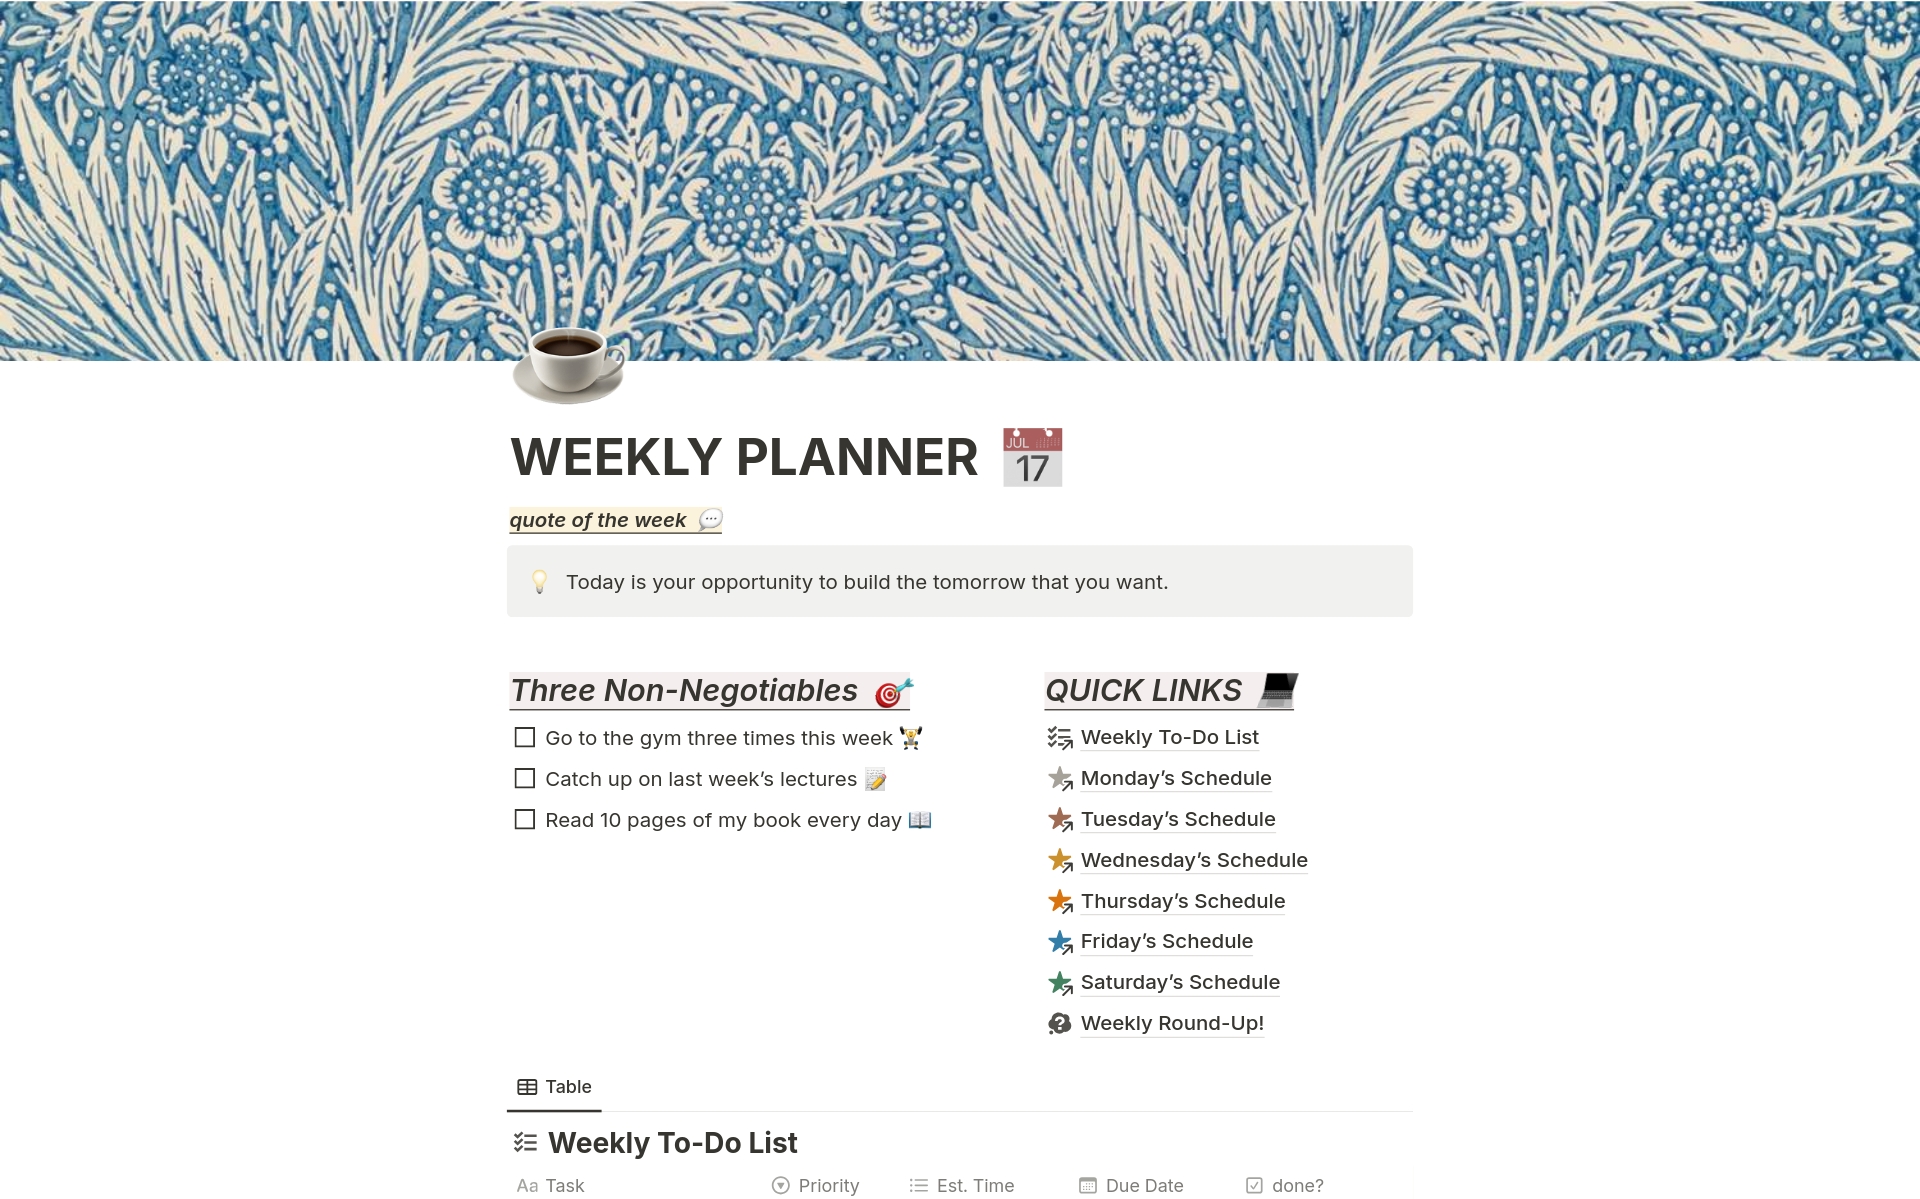 The Weekly Planner of Dreams のテンプレートのプレビュー